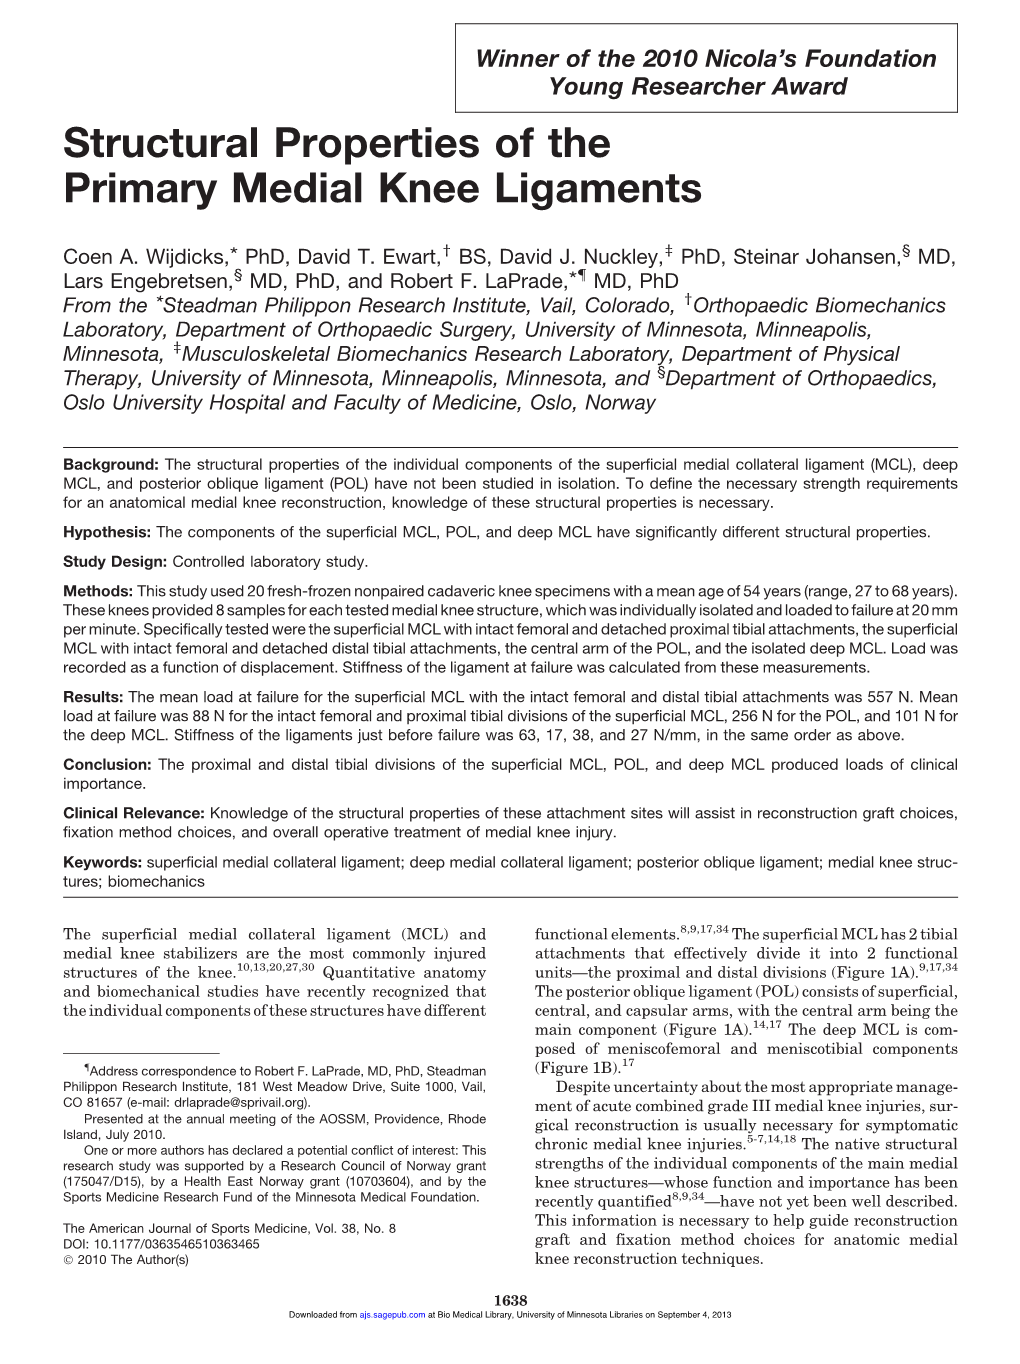 Structural Properties of the Primary Medial Knee Ligaments